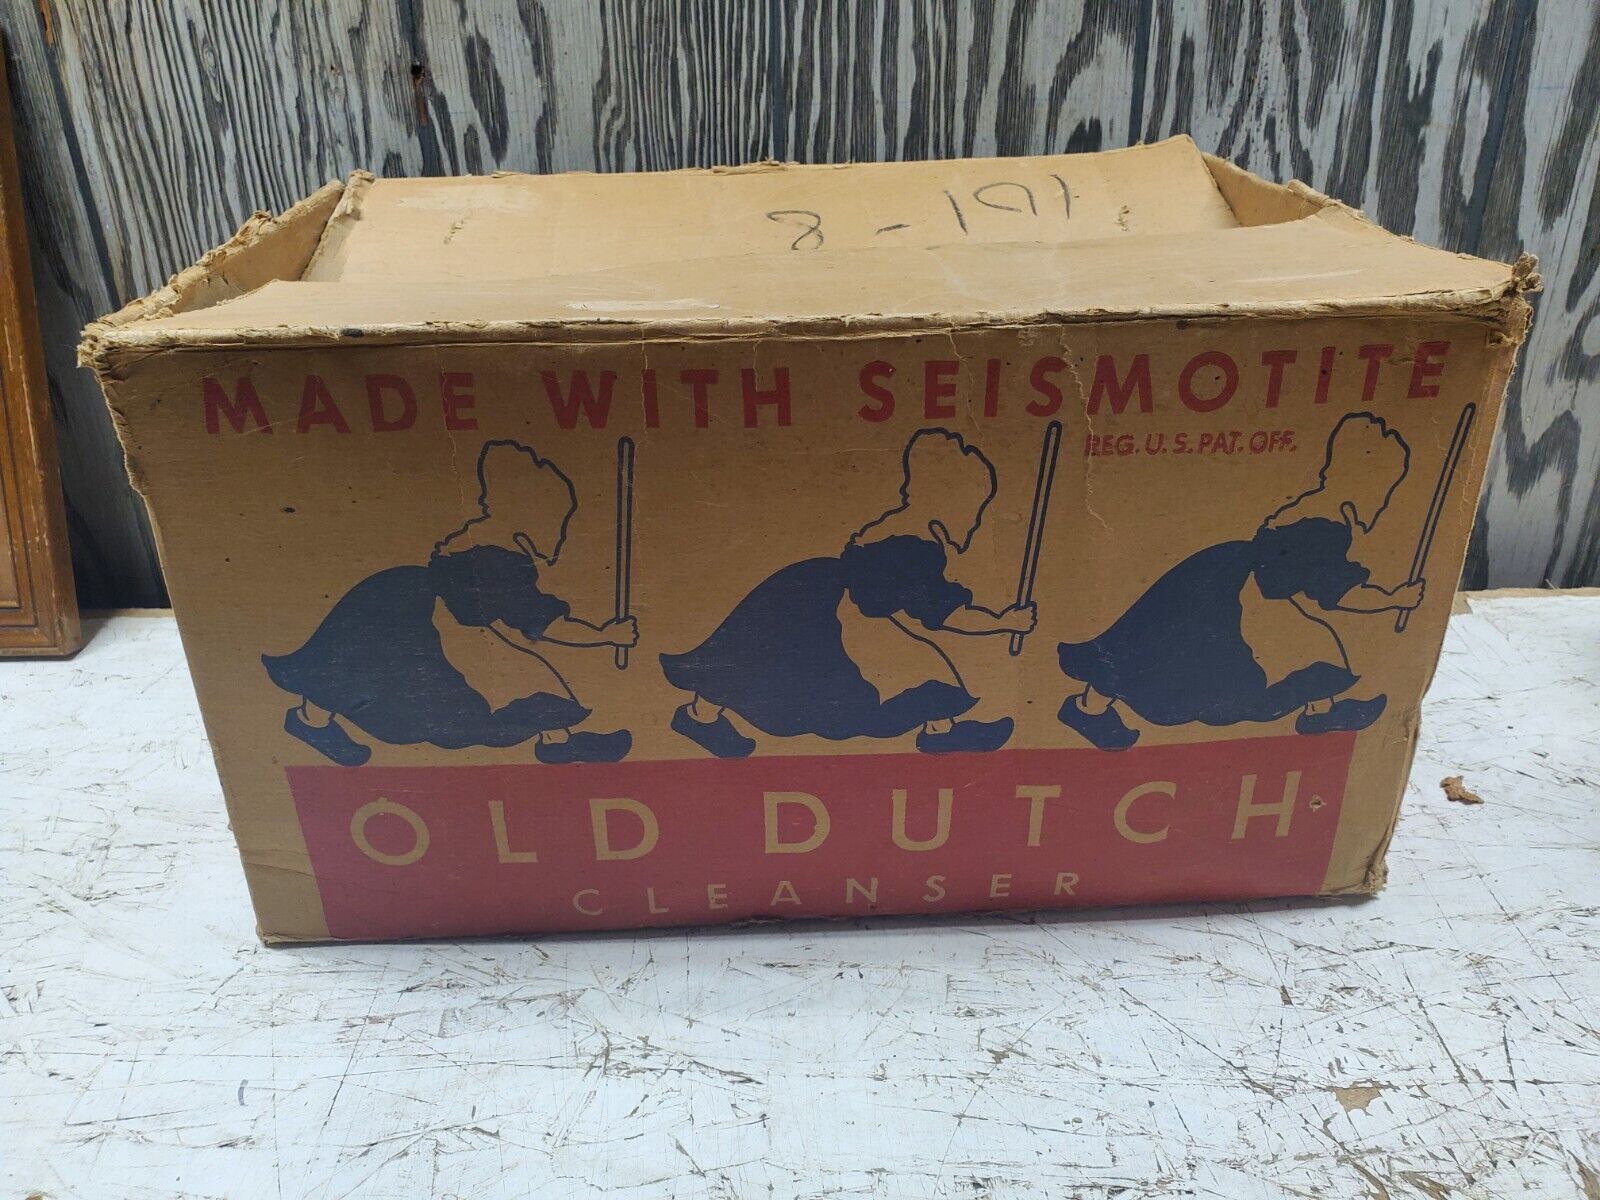 VNT Old Dutch Cleanser Seismotite Empty Carboard Box 19x13x10 Sunday Soapworks